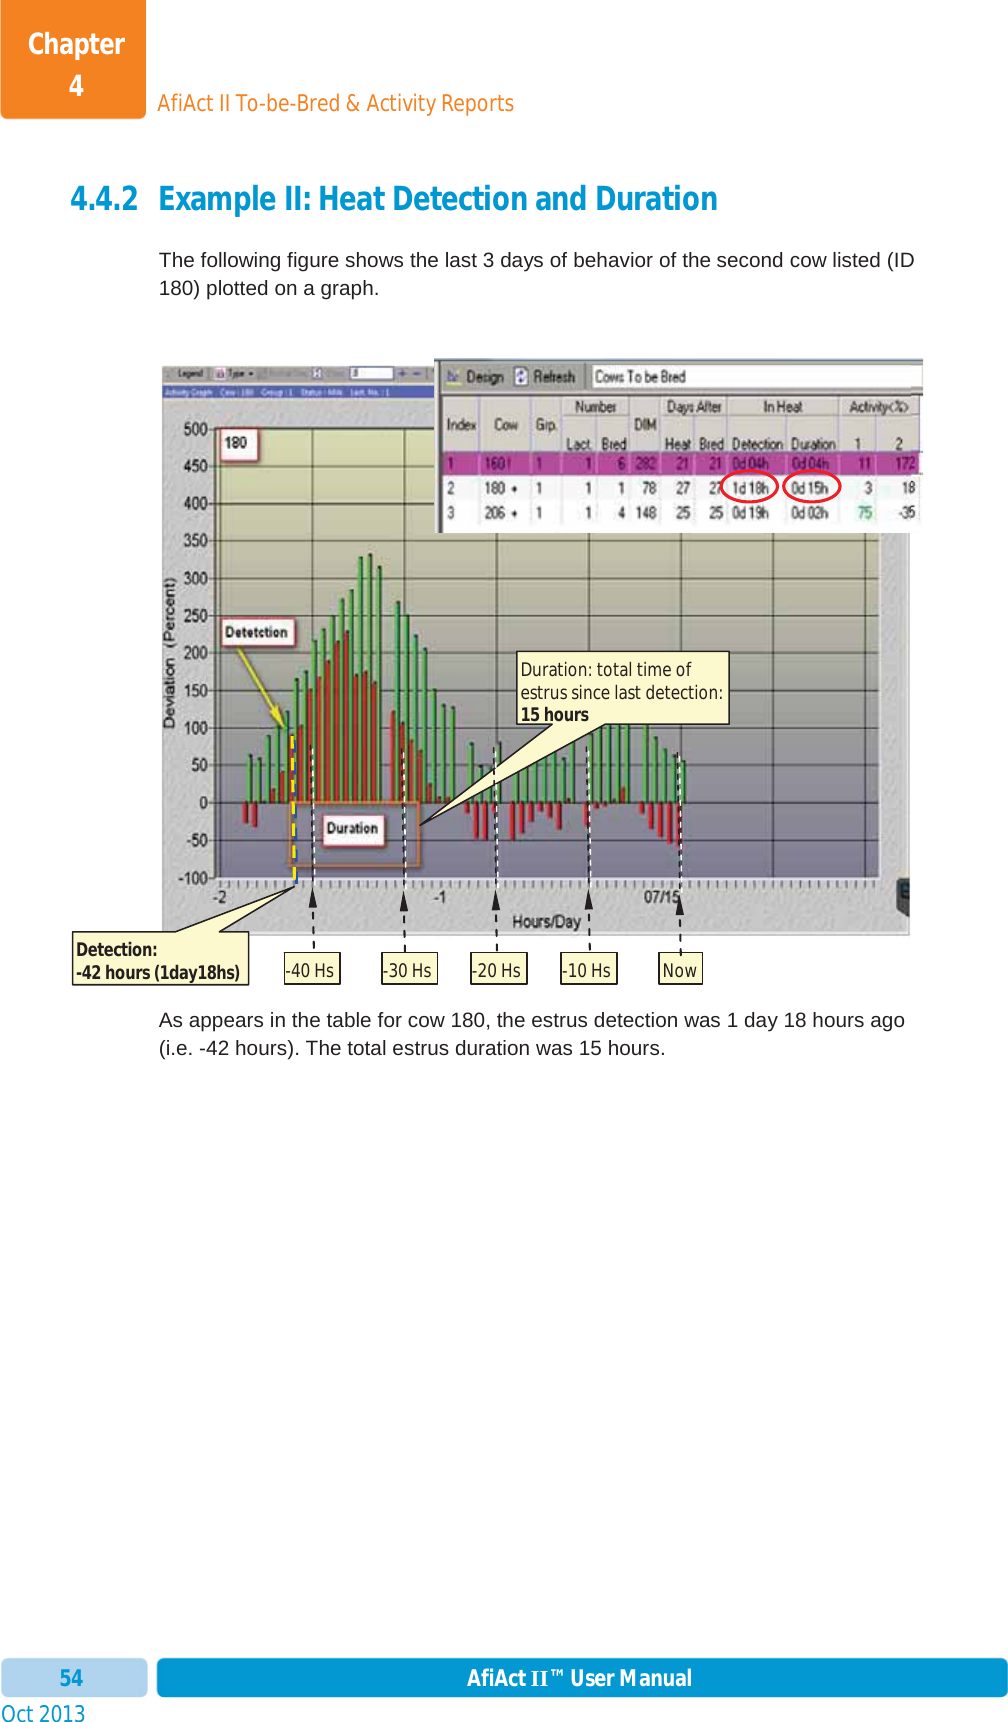 Oct 2013 AfiAct II™ User Manual54AfiAct II To-be-Bred &amp; Activity ReportsChapter 44.4.2 Example II: Heat Detection and Duration The following figure shows the last 3 days of behavior of the second cow listed (ID 180) plotted on a graph. As appears in the table for cow 180, the estrus detection was 1 day 18 hours ago (i.e. -42 hours). The total estrus duration was 15 hours. Duration: total time of estrus since last detection: 15 hoursNow Detection: -42 hours (1day18hs)  -10 Hs -20 Hs -30 Hs -40 Hs 